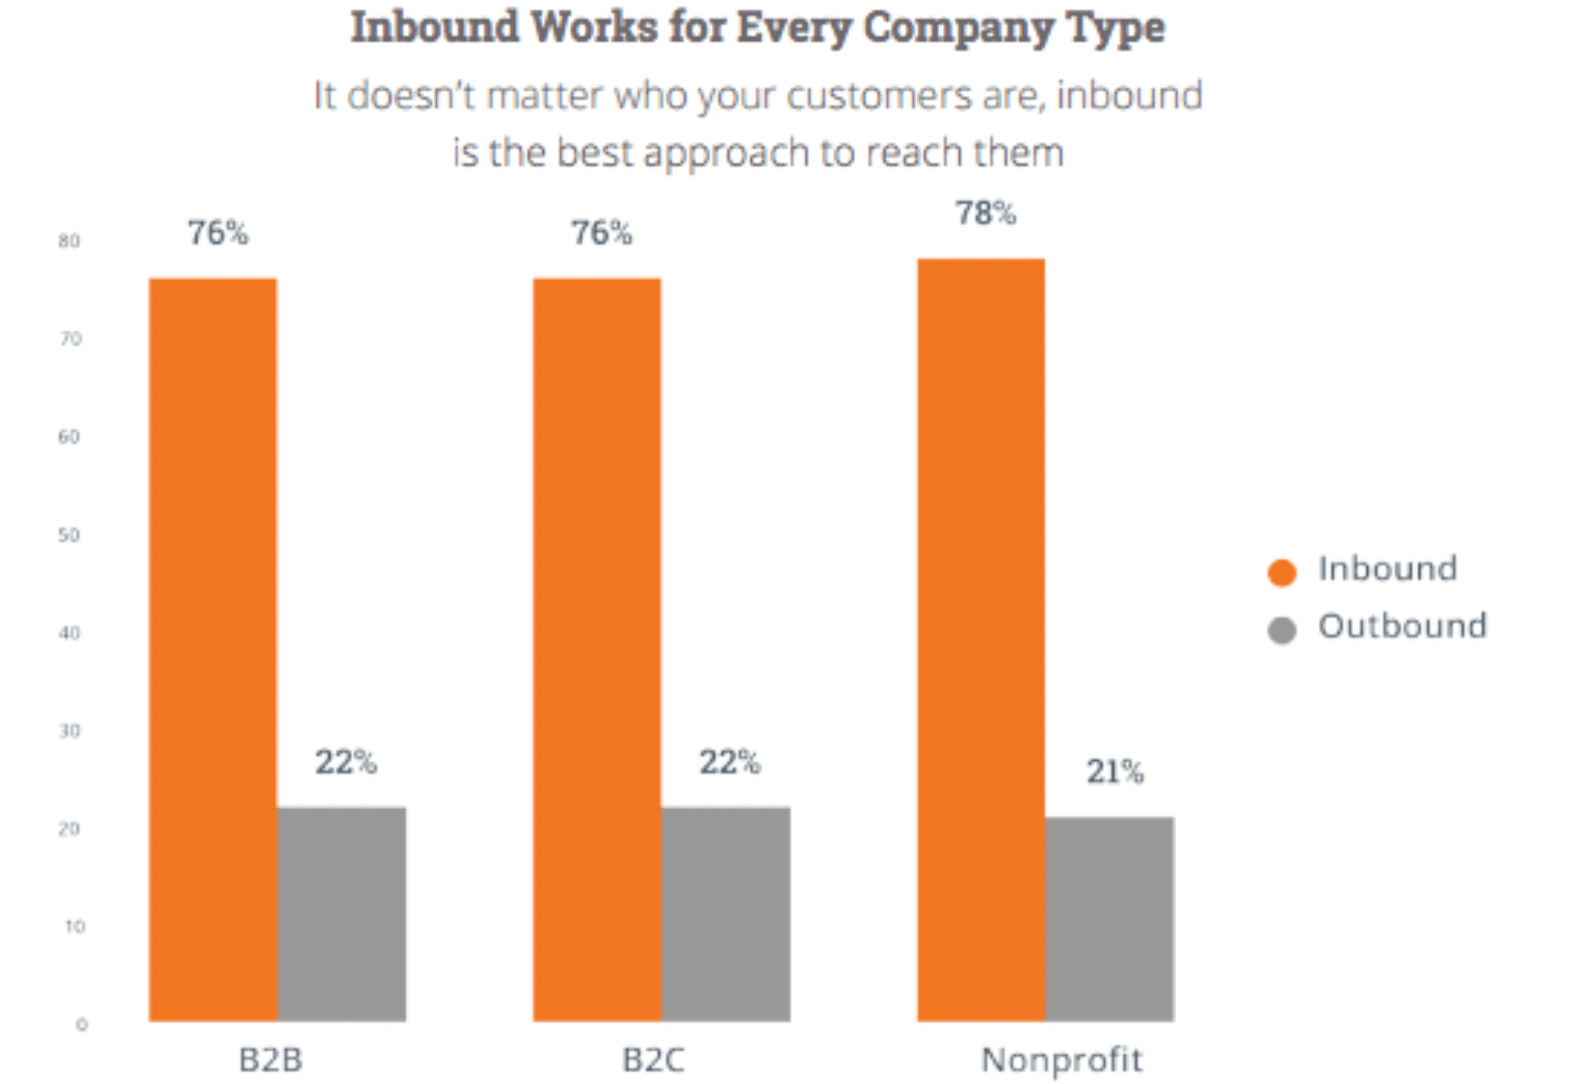 Graph showing the difference between inbound and outbound marketing for B2B, B2C and Nonprofit